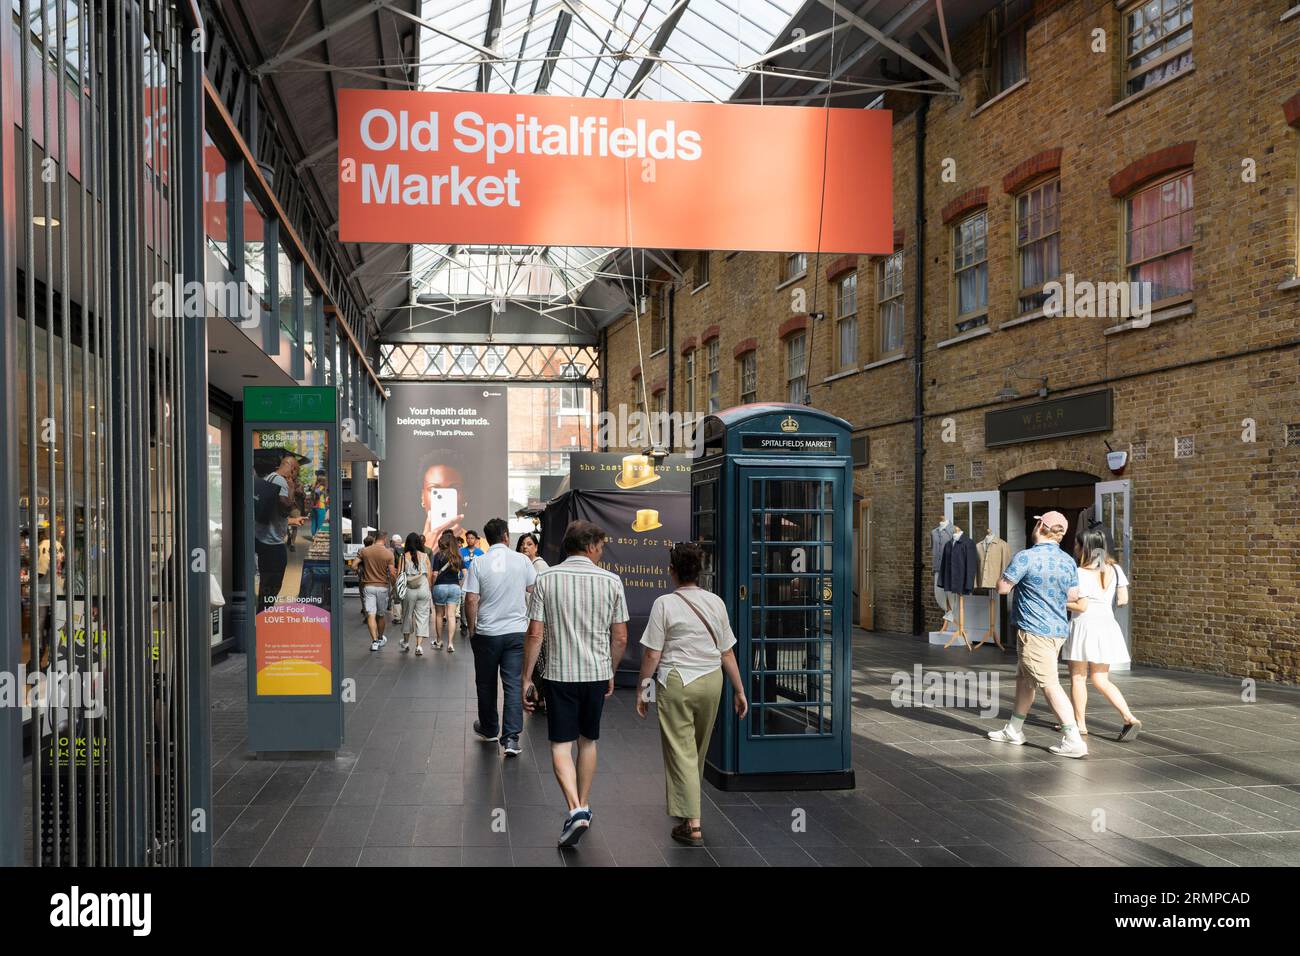 People walking through the covered Old Spitalfields Market with a large advertising sign hanging above and a green telephone box. London, England Stock Photo